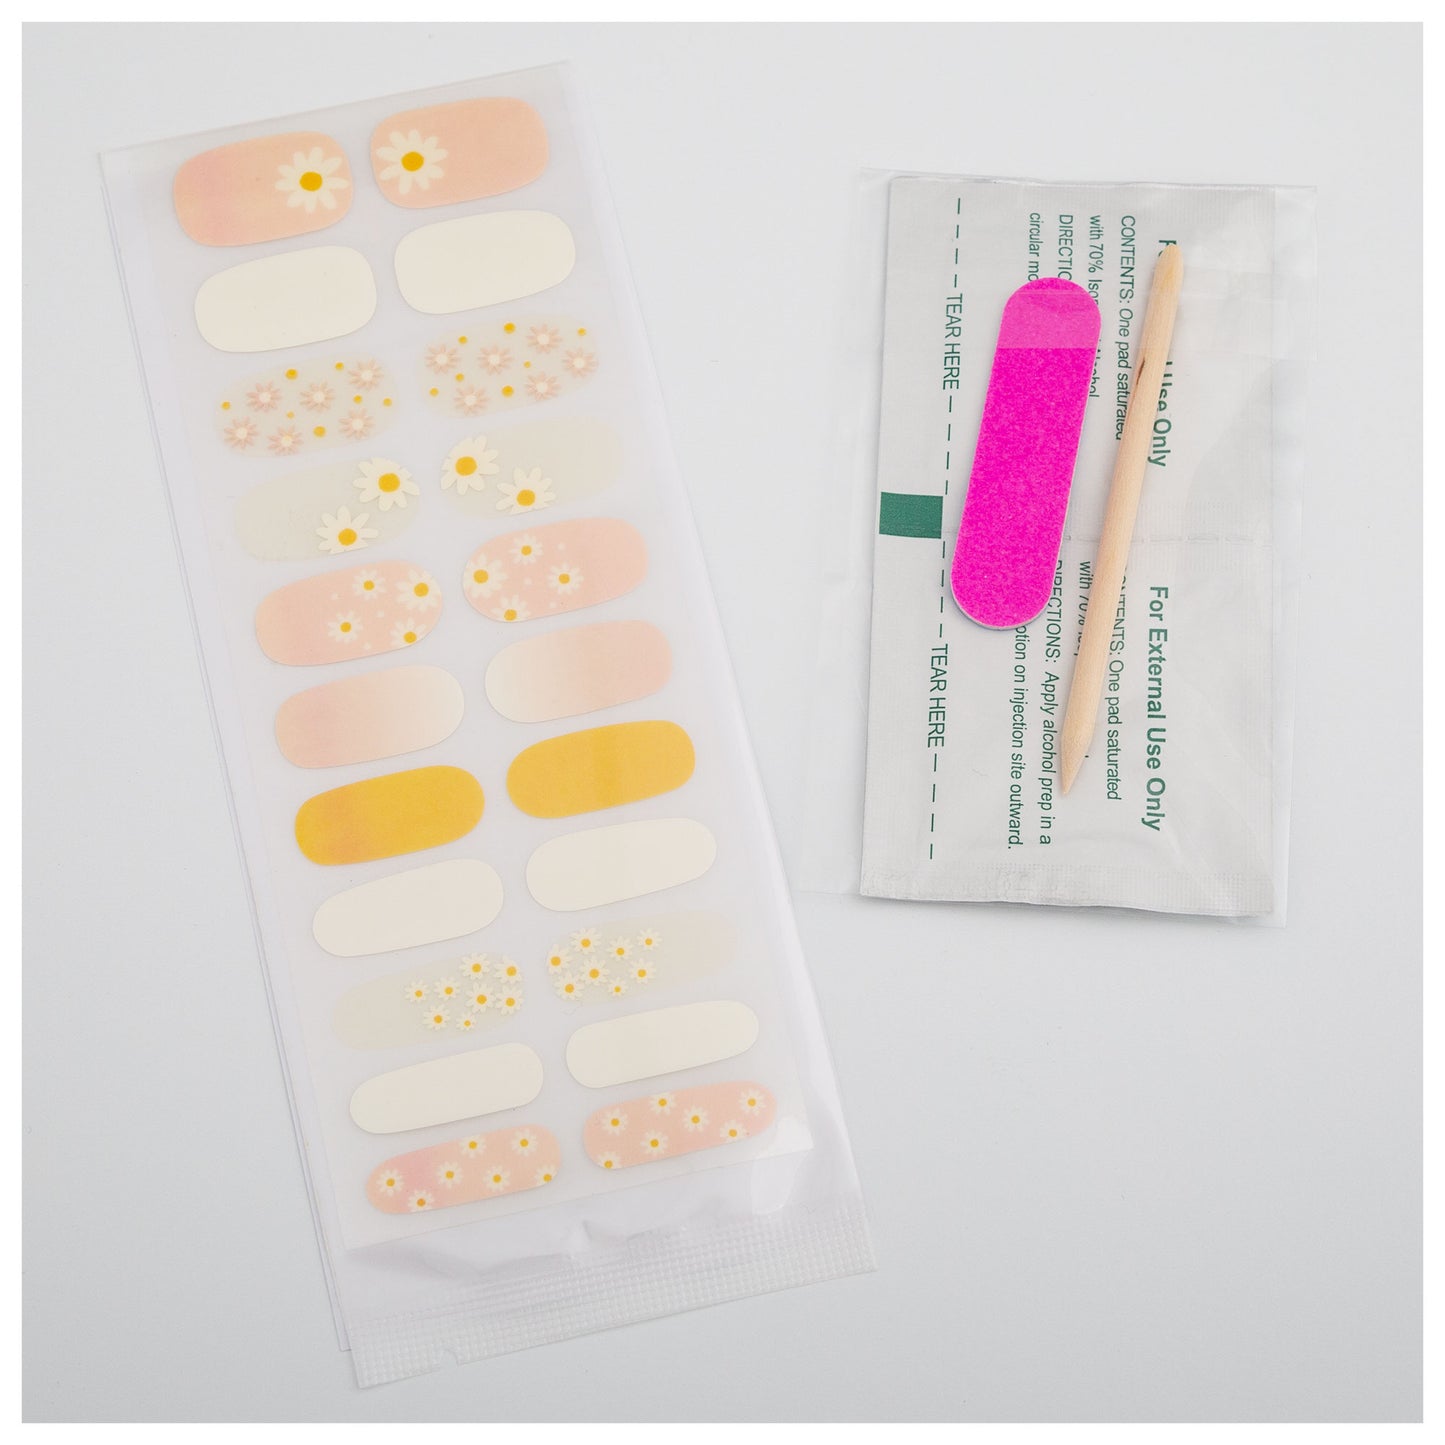 Flowers for the Sunshine Manicure Nail Wrap Kit